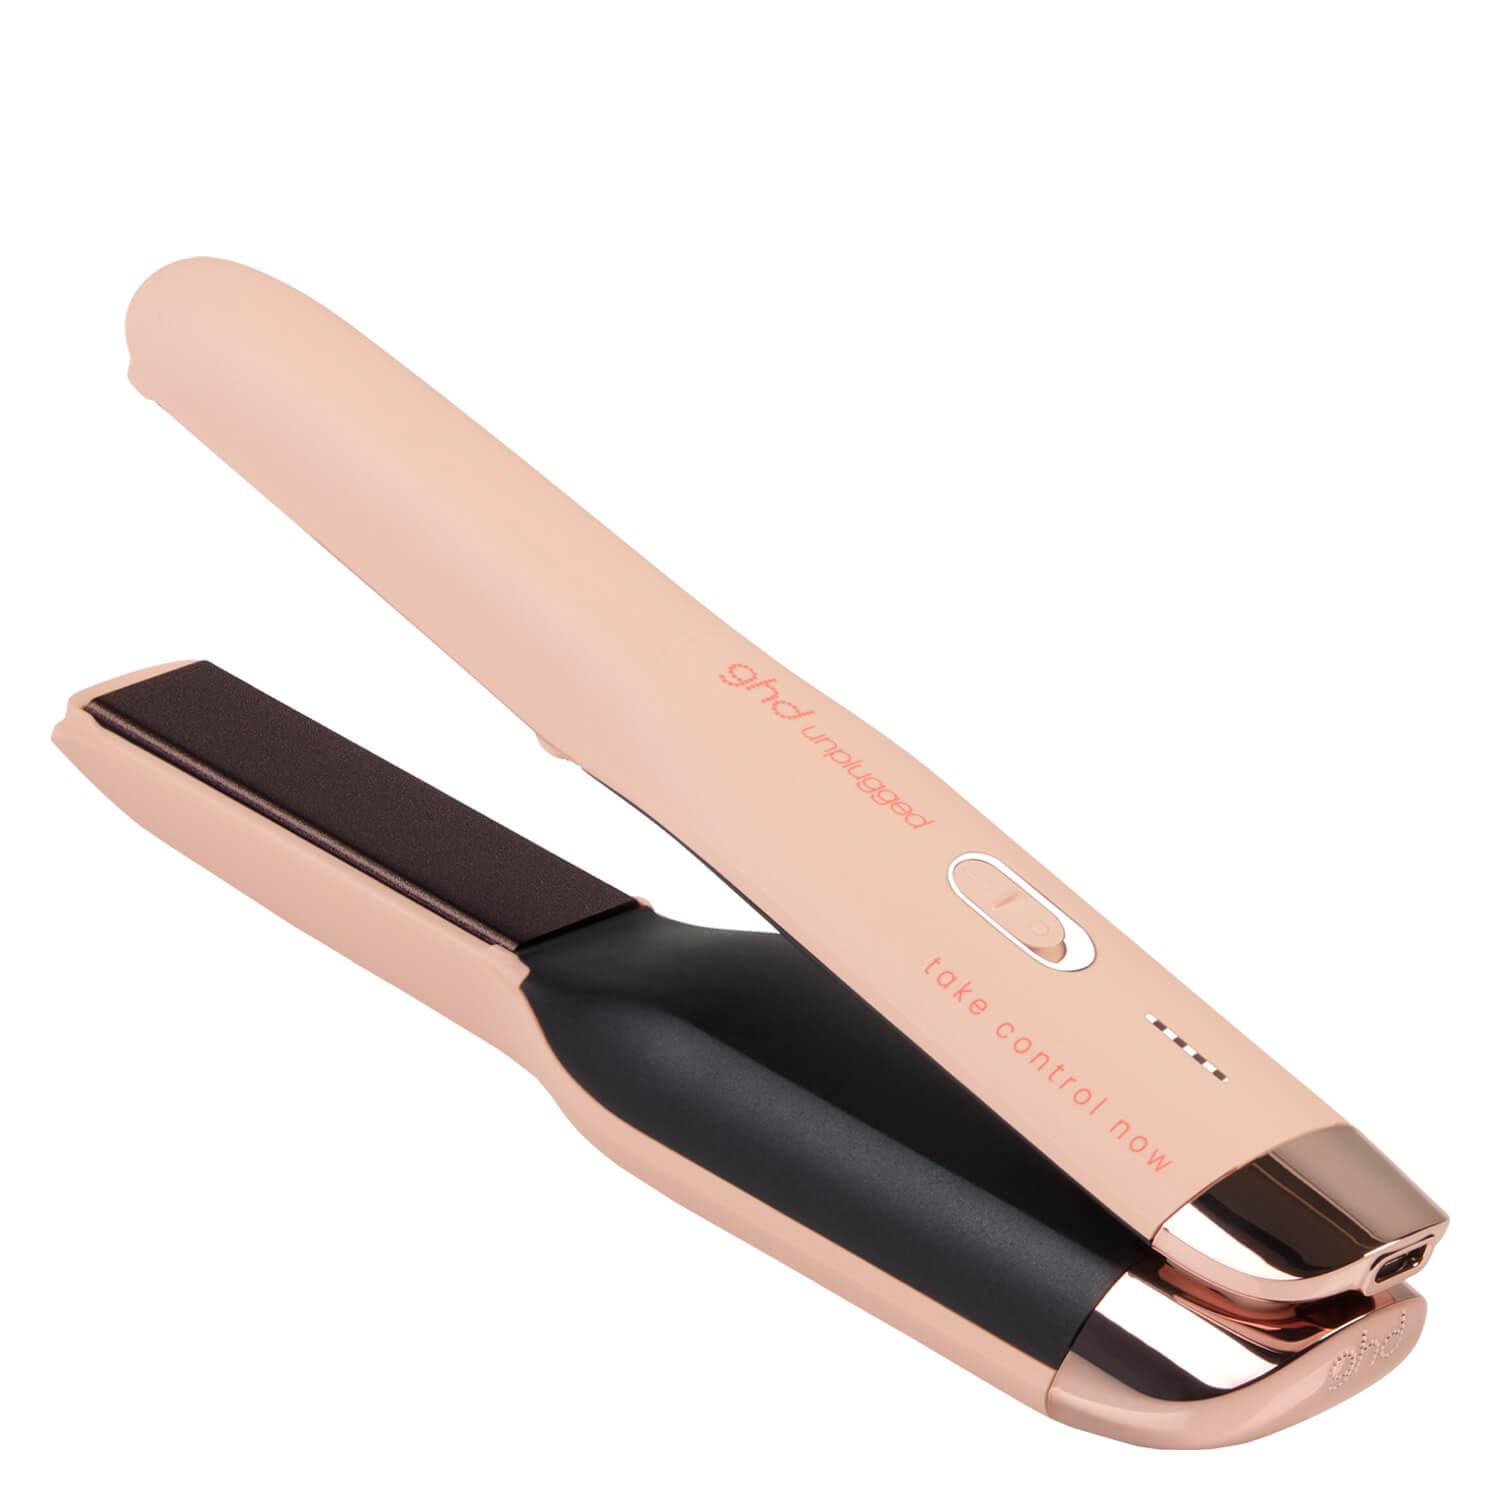 ghd Tools - Unplugged Cordless Styler Pink Peach Charity Edition